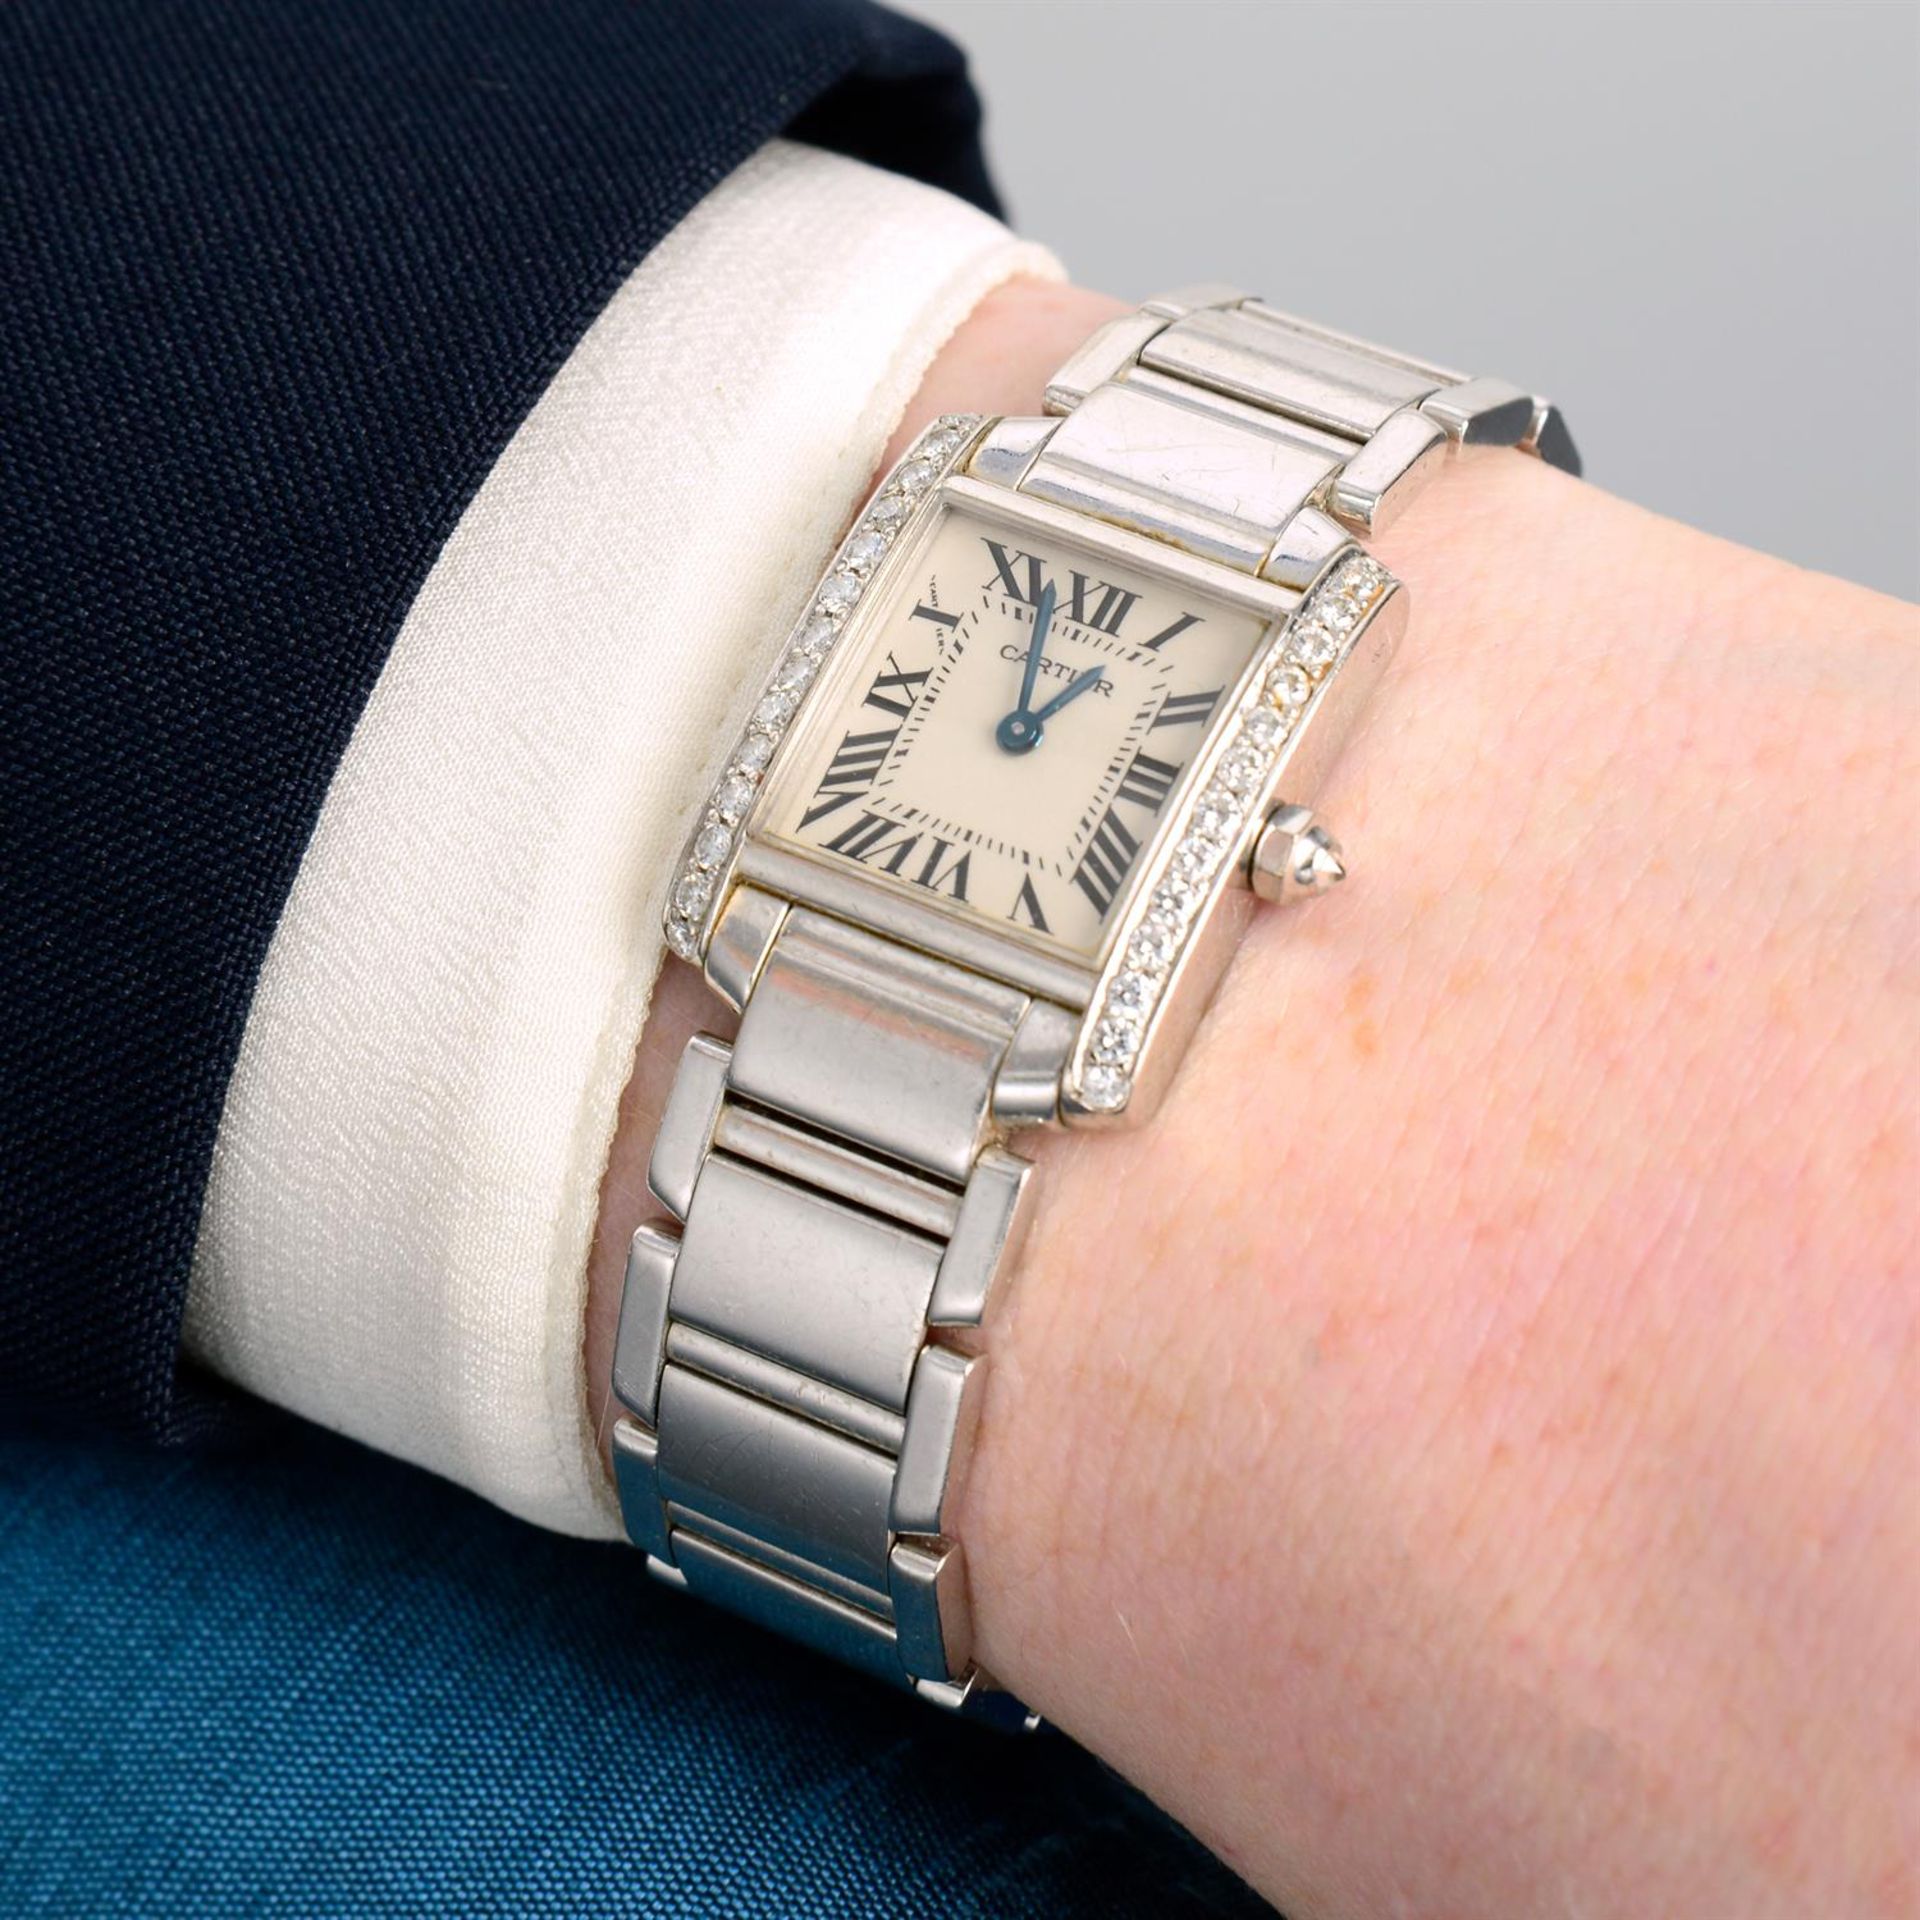 CARTIER - an 18ct white gold Tank Francaise bracelet watch, 20mm. - Image 6 of 6